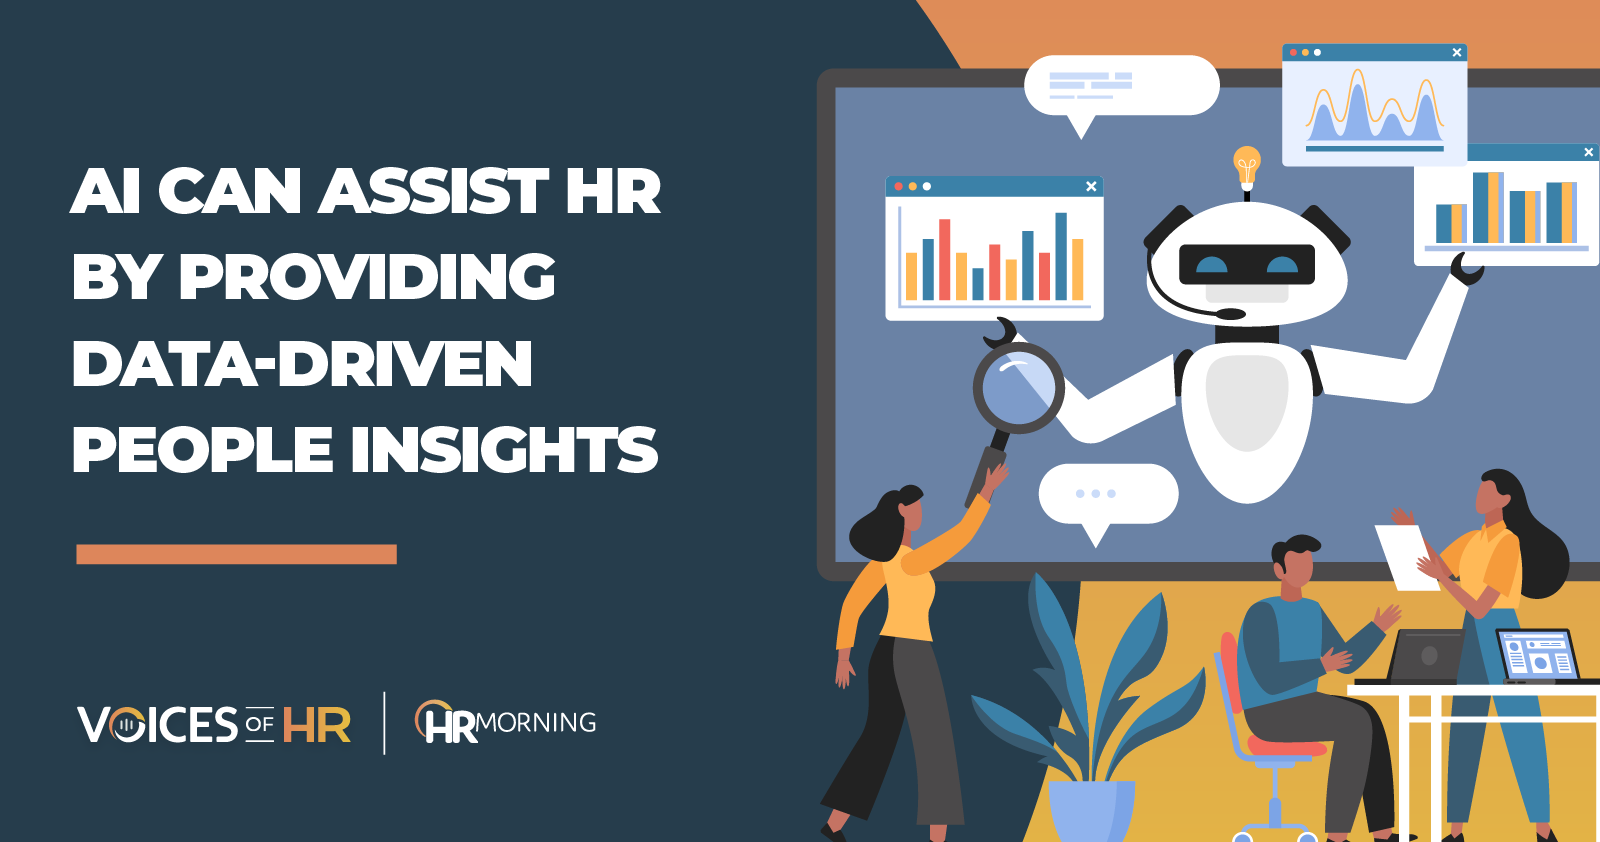 AI can assist HR by providing data-driven people insights